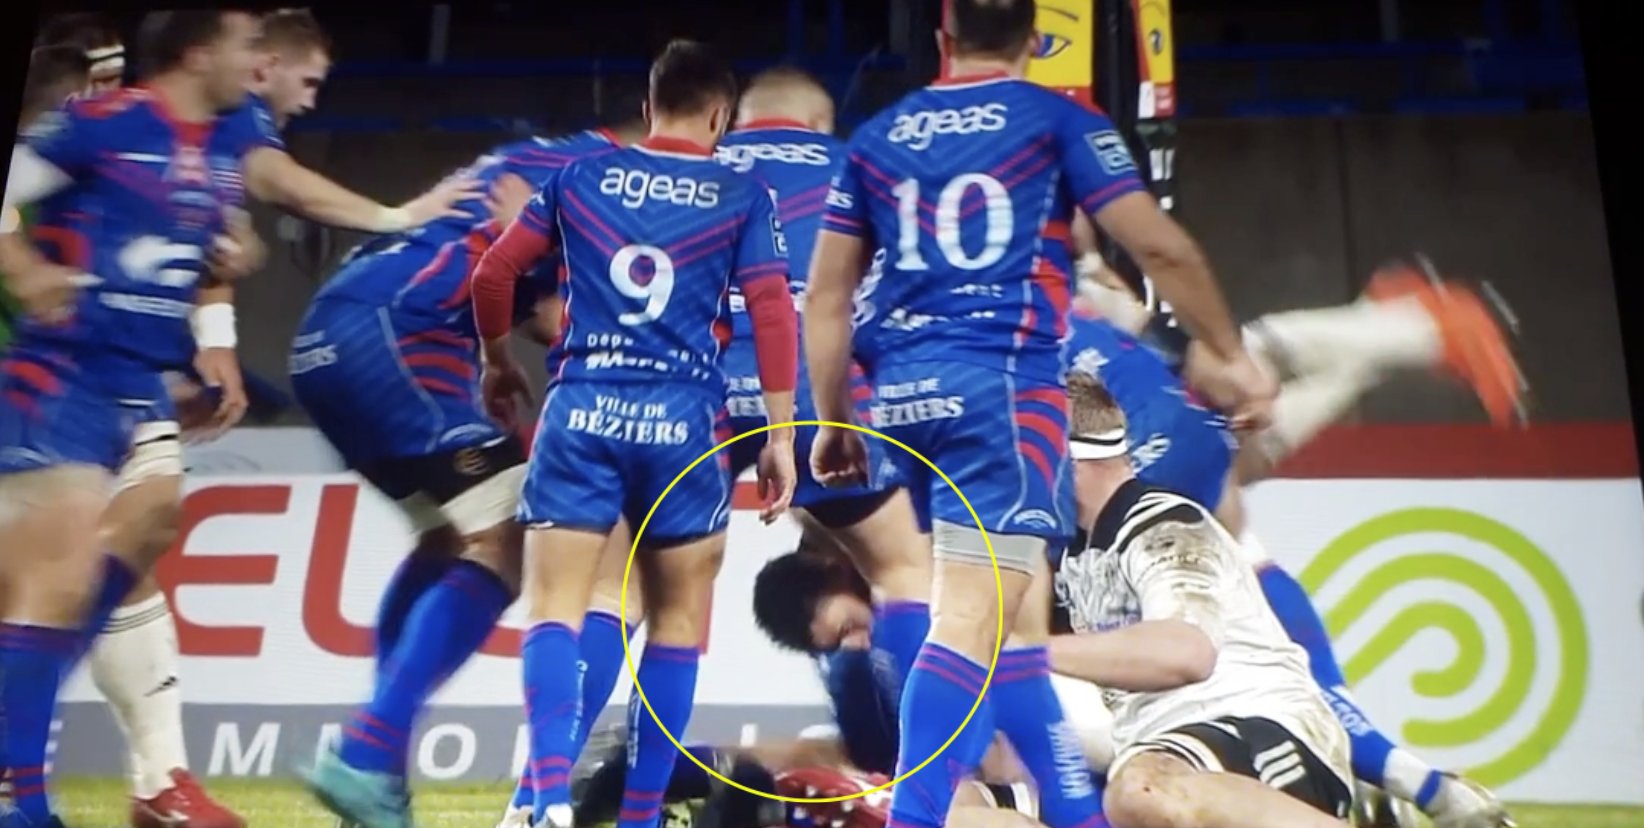 FOOTAGE: French horror tackle inexplicably only awarded a yellow card